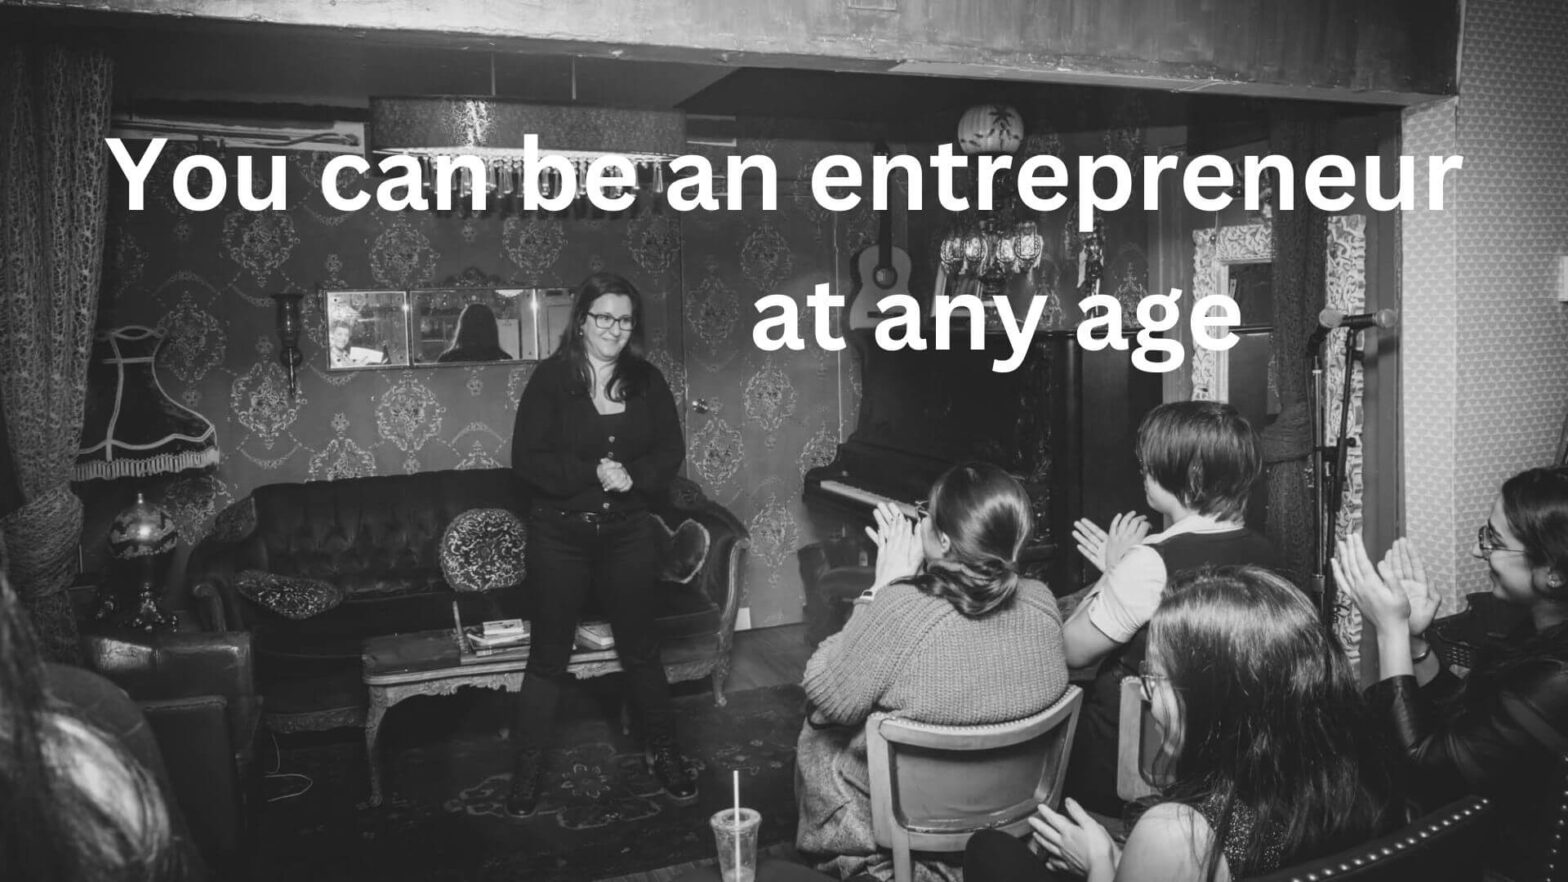 You can be an entrepreneur at any age